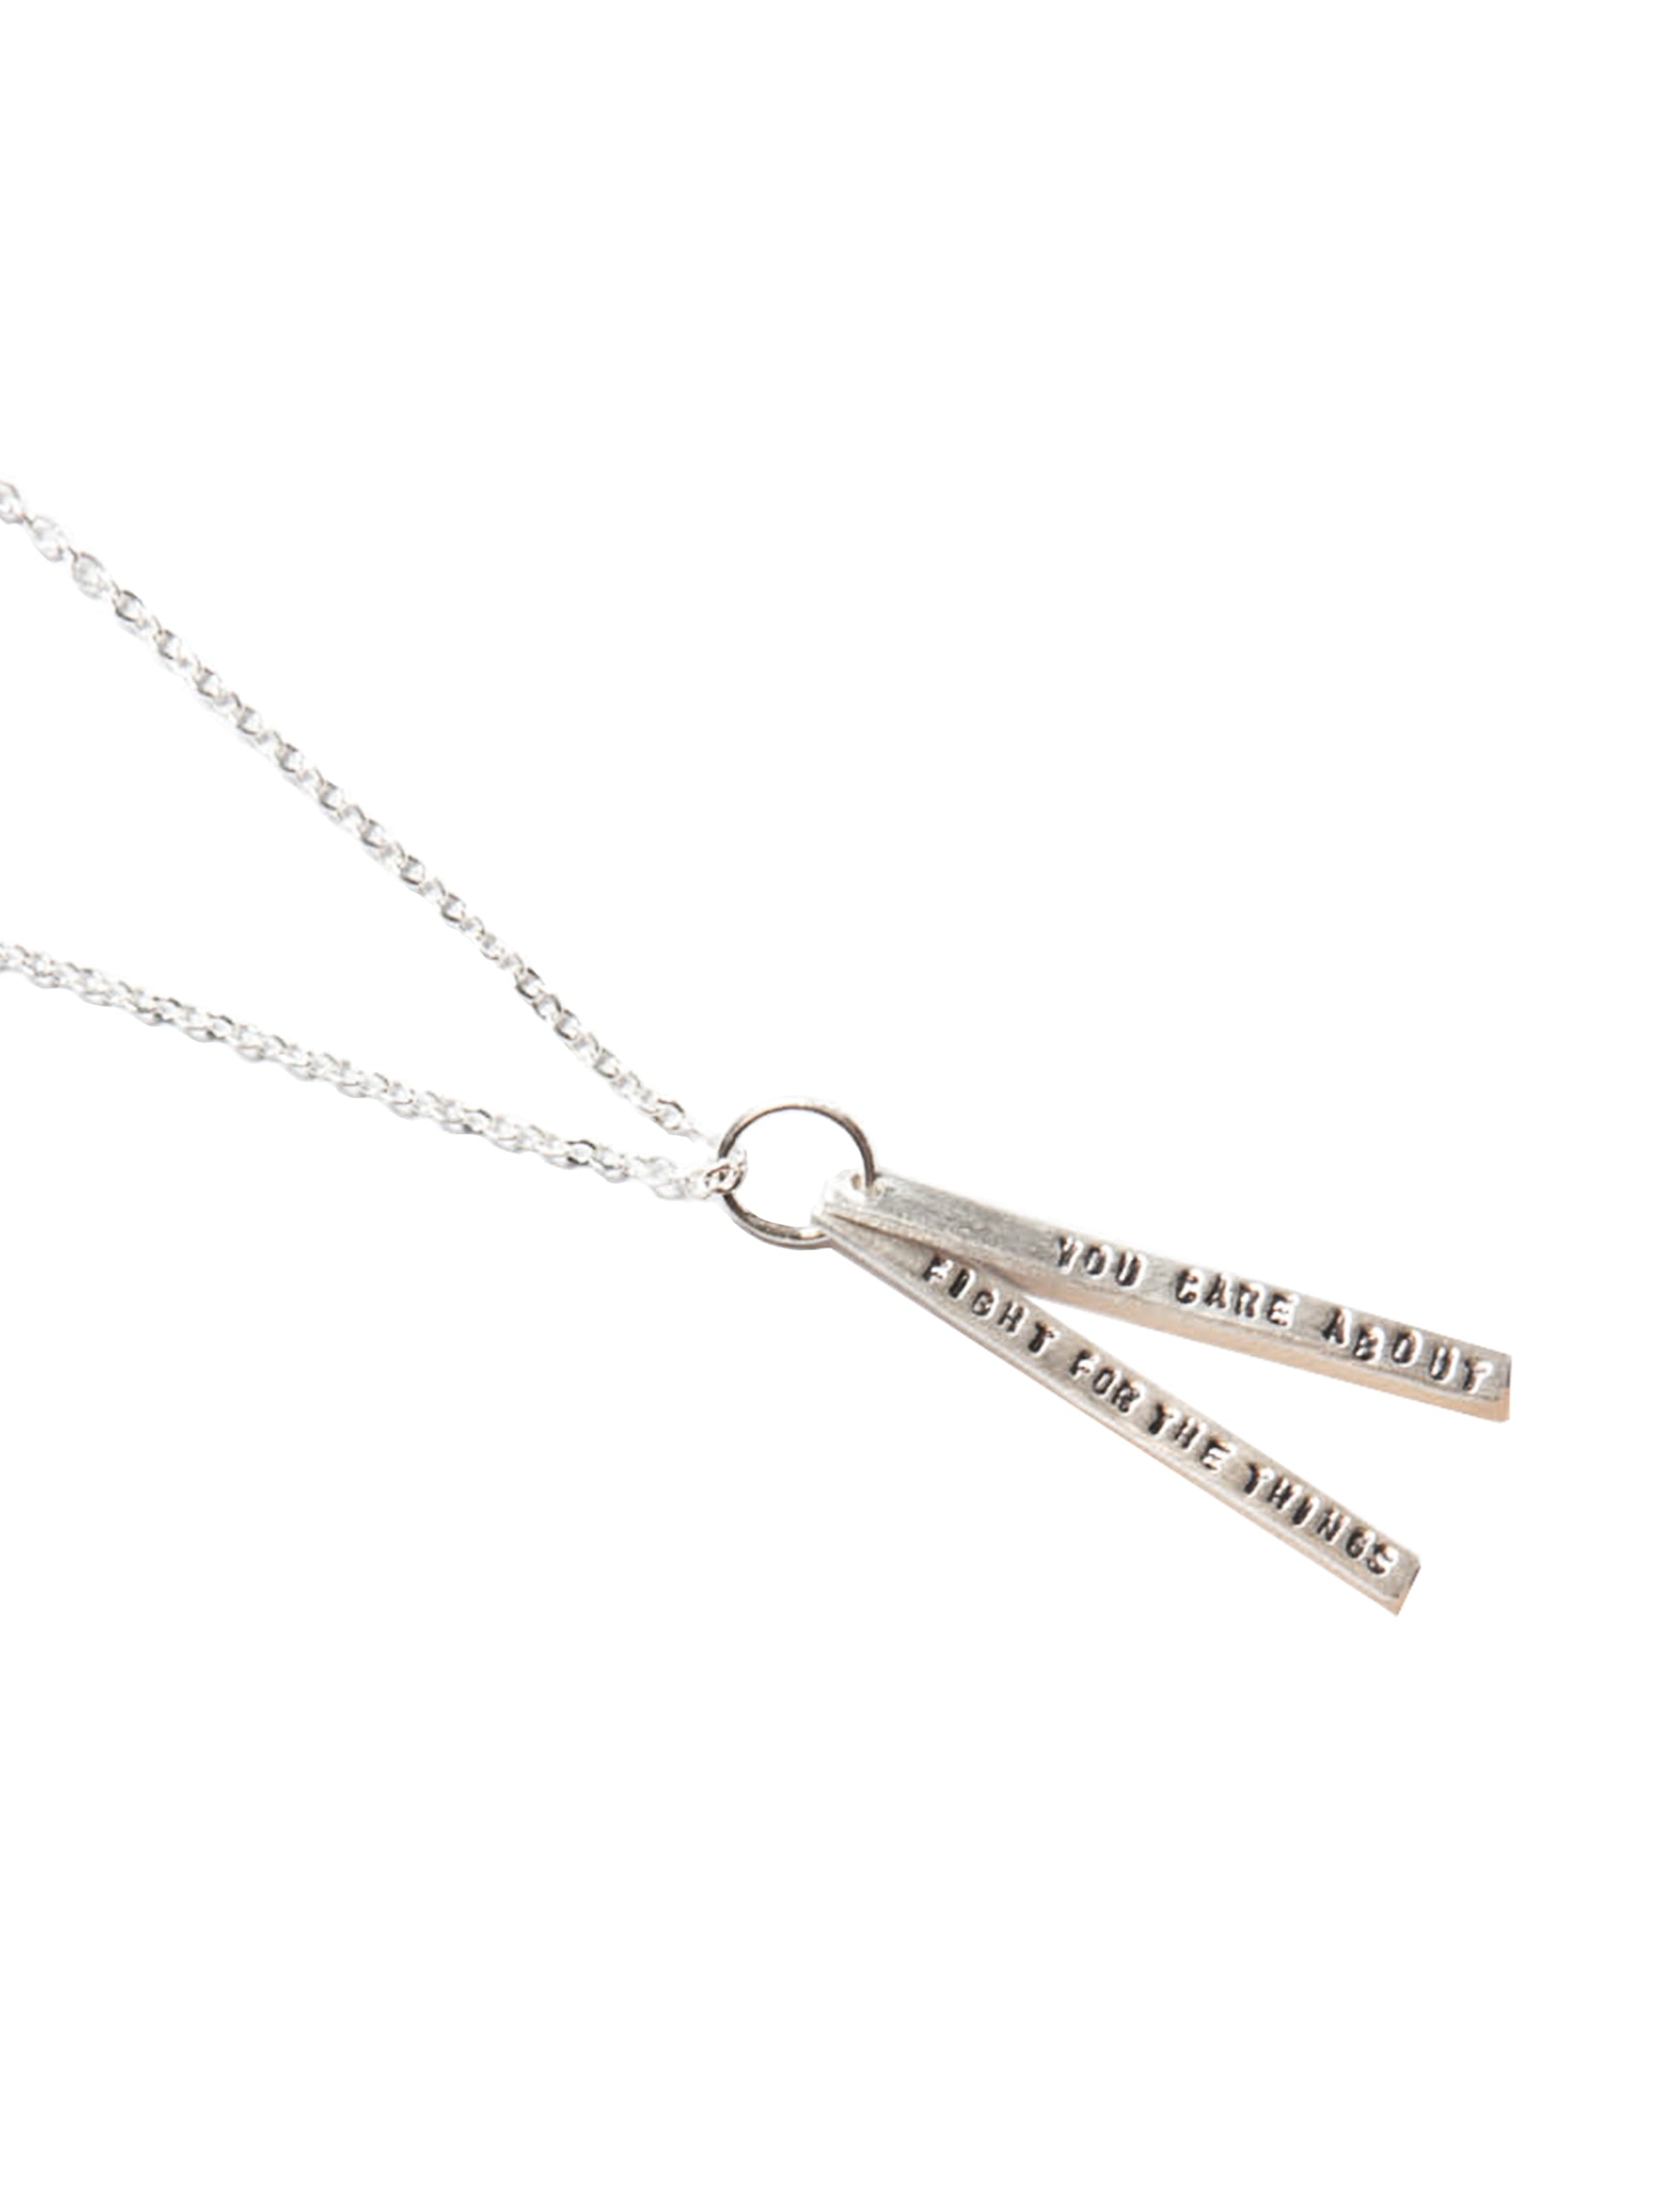 Chocolate & Steel Long-Bar Quote Necklace Ruth Bader Ginsburg Silver Weston Table